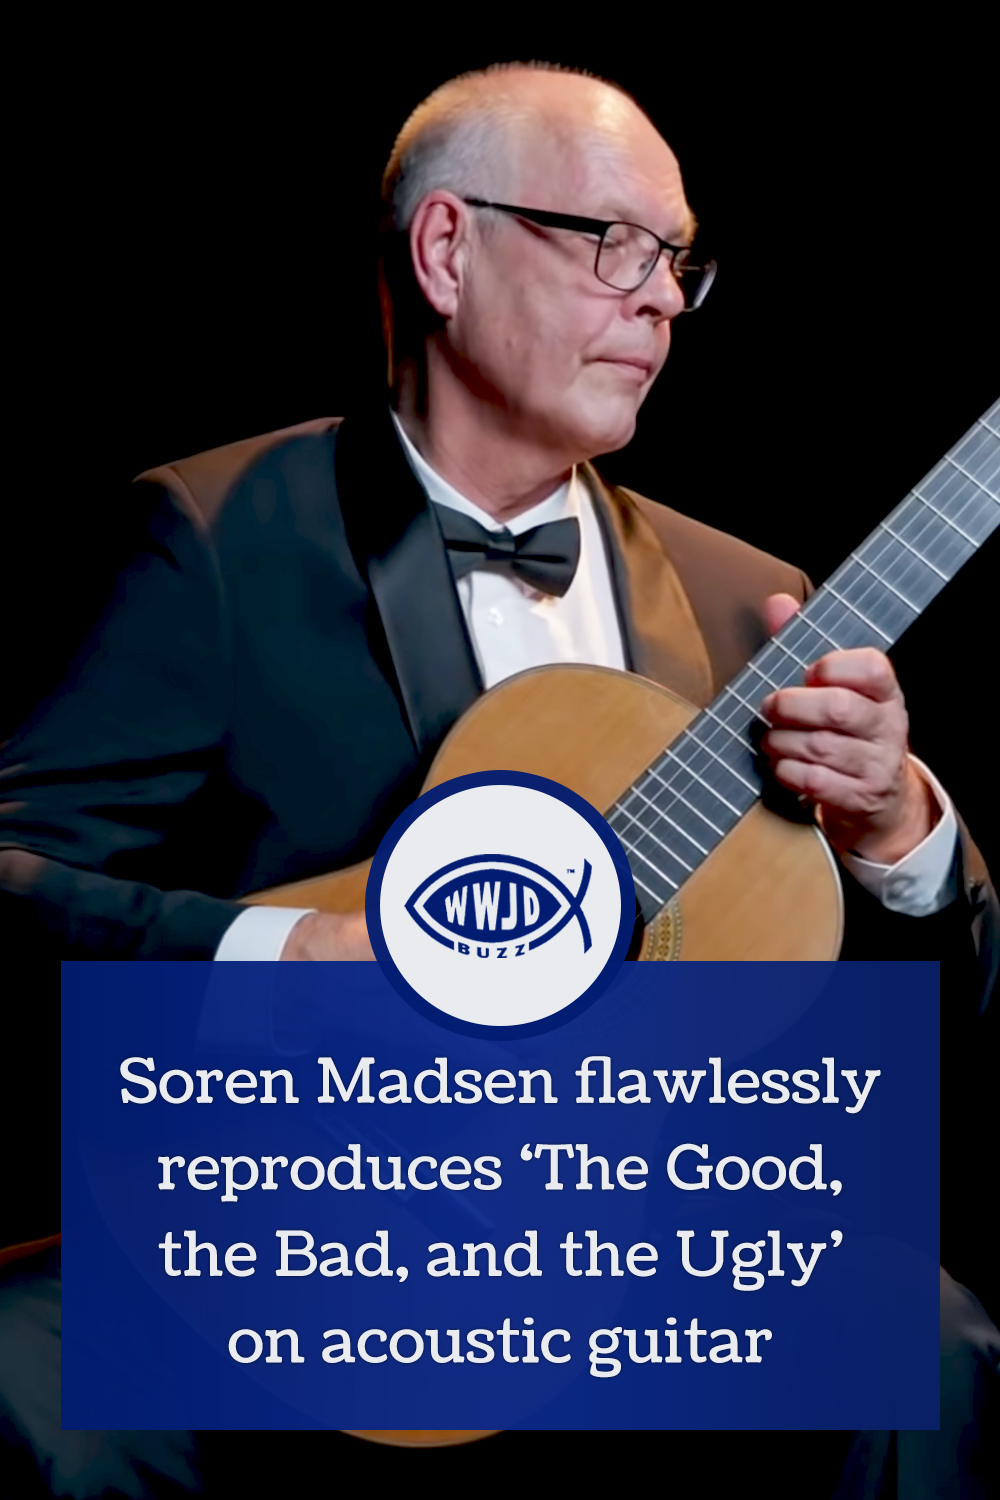 Soren Madsen flawlessly reproduces ‘The Good, the Bad, and the Ugly’ on acoustic guitar